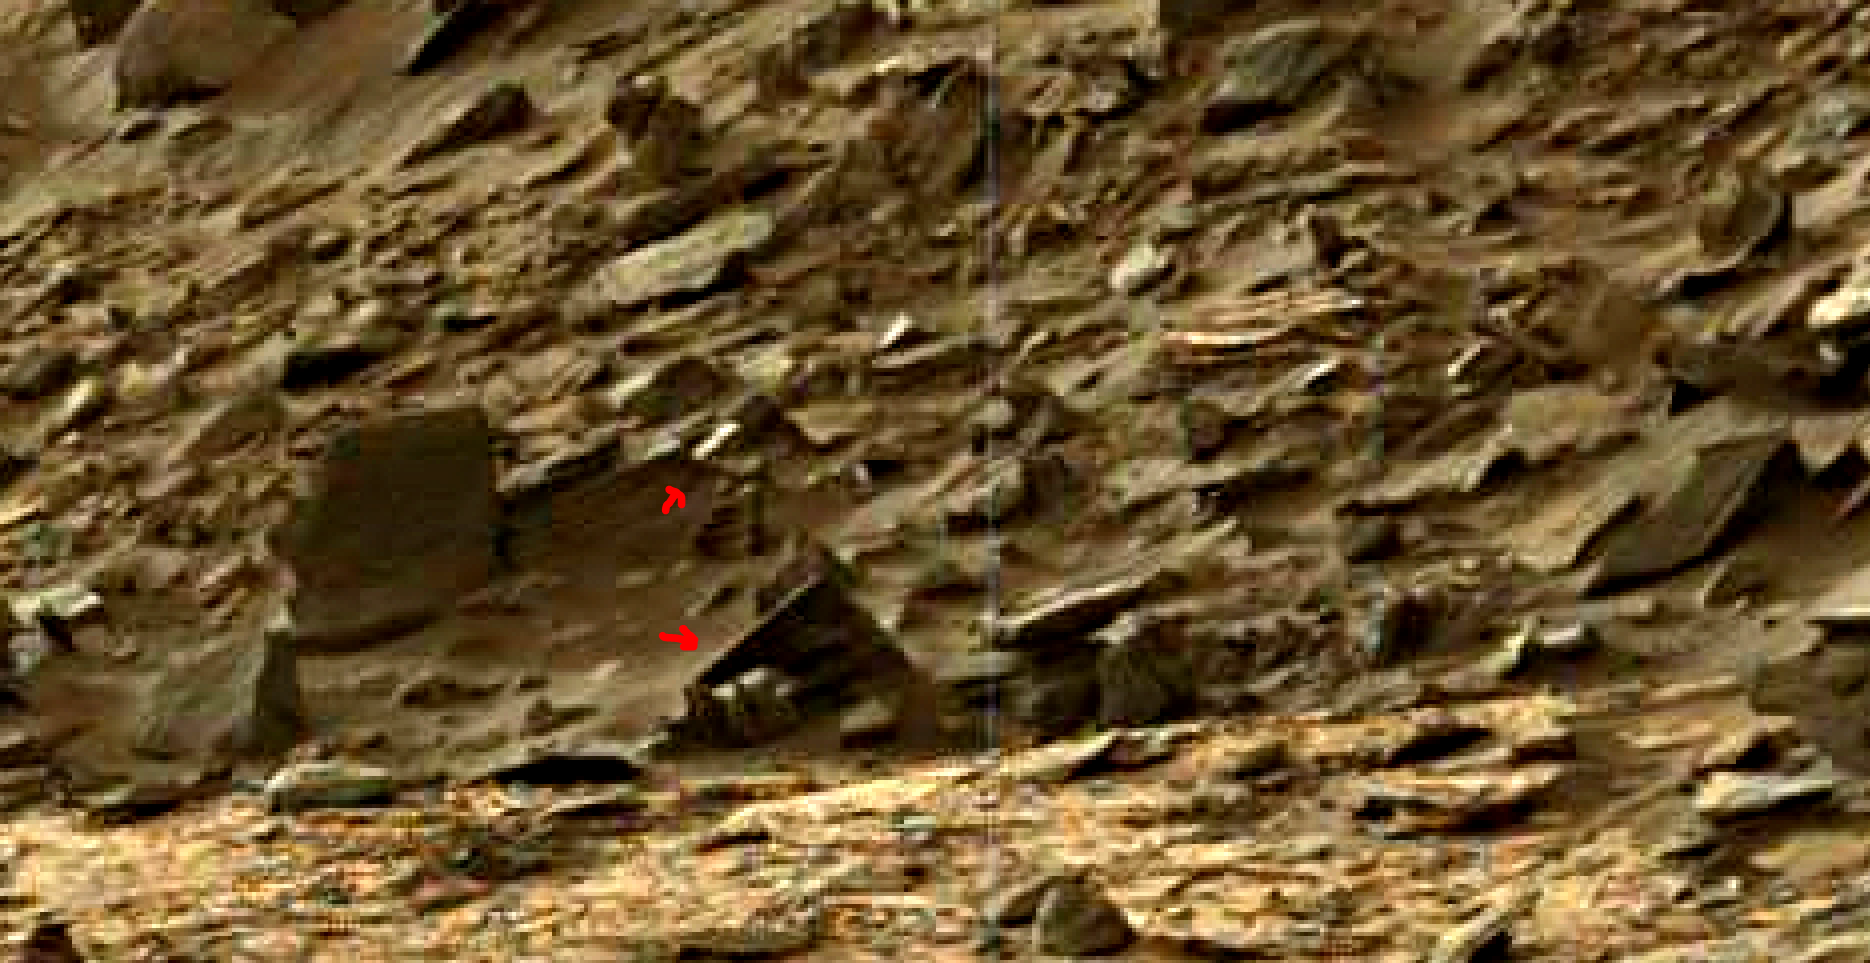 mars-sol-1454-anomaly-artifacts-32-was-life-on-mars